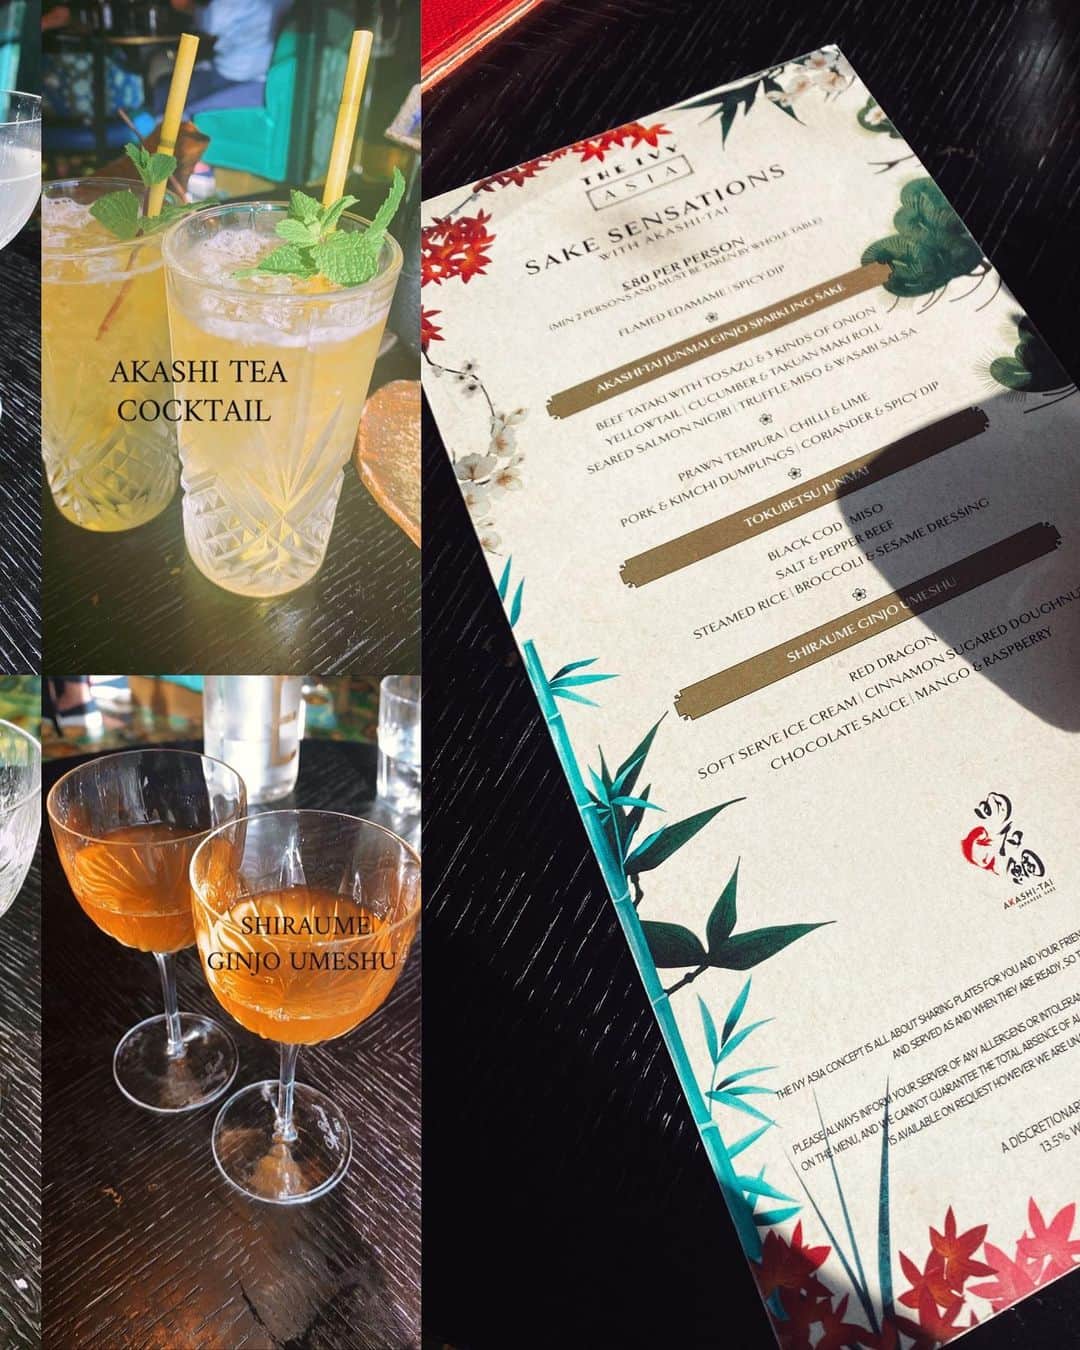 LIKARANAIさんのインスタグラム写真 - (LIKARANAIInstagram)「The Ivy Asia 🌸 We had an amazing SAKE lunch with @theivyasia yesterday 🍶🍱 I was so excited to try some of the new offerings on the menu and they did not disappoint.  We tried the Sake Sensations Menu, It’s a fantastic experience menu paired with three glasses of sake, that really bring out the flavours!  𓏊 AKASHI-TAIJUNMAI GINJO SPARKLING SAKE Starters: Beef tataki, yellowtail, cucumber & takins maki roll, seared salmon nigiri, prawn tempura, pork & kimchi dumplings   𓏊 TOKUBETSU JUNMA Mains: Black cod miso, salt & pepper beef, broccoli w/ steamed rice  𓏊 SHIRAUME GINJO UMESHU Red Dragon Dessert: Soft serve ice cream, cinnamon sugared doughnuts w/ chocolate sauce, mango & raspberry  They were all incredible but this sugared doughnuts was heavenly! I can’t go to The Ivy Asia and not have the dessert platter 🤤 The starters were delicious, and the Black cod miso was my fave dish, it was sublime!  Definitely a restaurant to book for a special occasion/ birthdays if you just want to treat yourself! Great quality food with exceptional service. Go check out @theivyasia   *ᴘʀ ɪɴᴠɪᴛᴇ  #TheIvyAsia #TheIvyAsiaGuildford #SakeSensations   。 。 。 。 。 。  #guildford #surrey #londonfoodscene #food #sake #londonfoodspots #londonfoodgram #japanesecuisine #london #visitlondon #londontravel #explorelondon #discoverlondon #england #uk #londoncitylife #beautifulengland #likeforlikes #shoutout #girlstravel #コメント返し  #写真好きな人と繋がりたい #おはようございます」11月2日 7時03分 - likaran